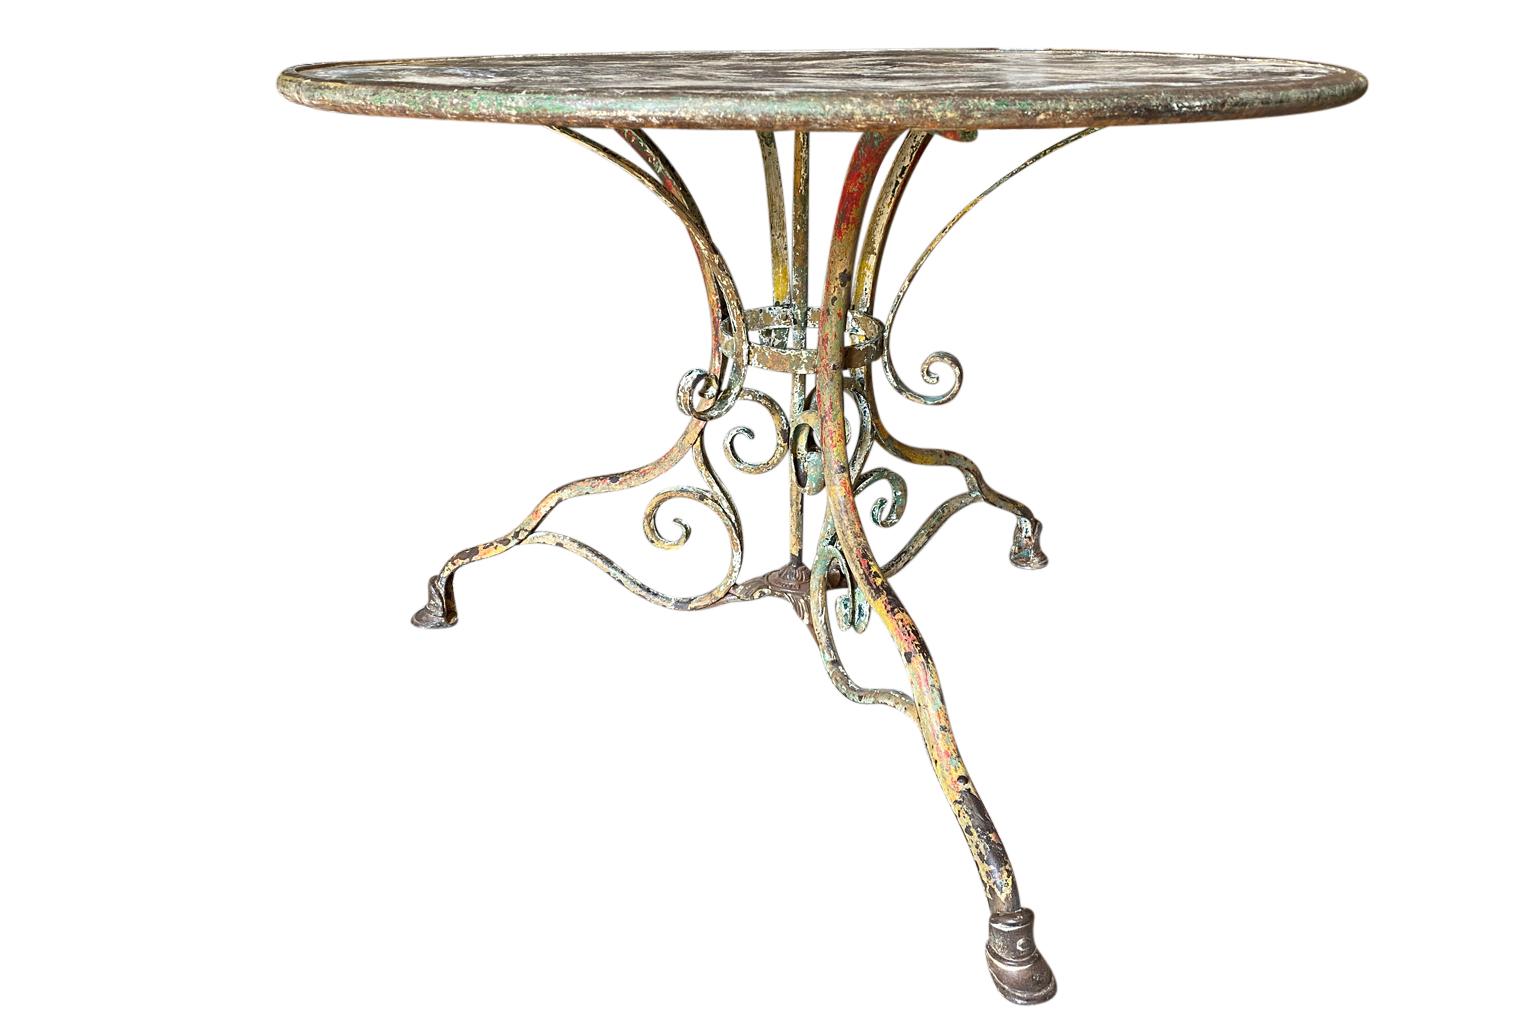 Painted French 19th Century Garden Table from Arras